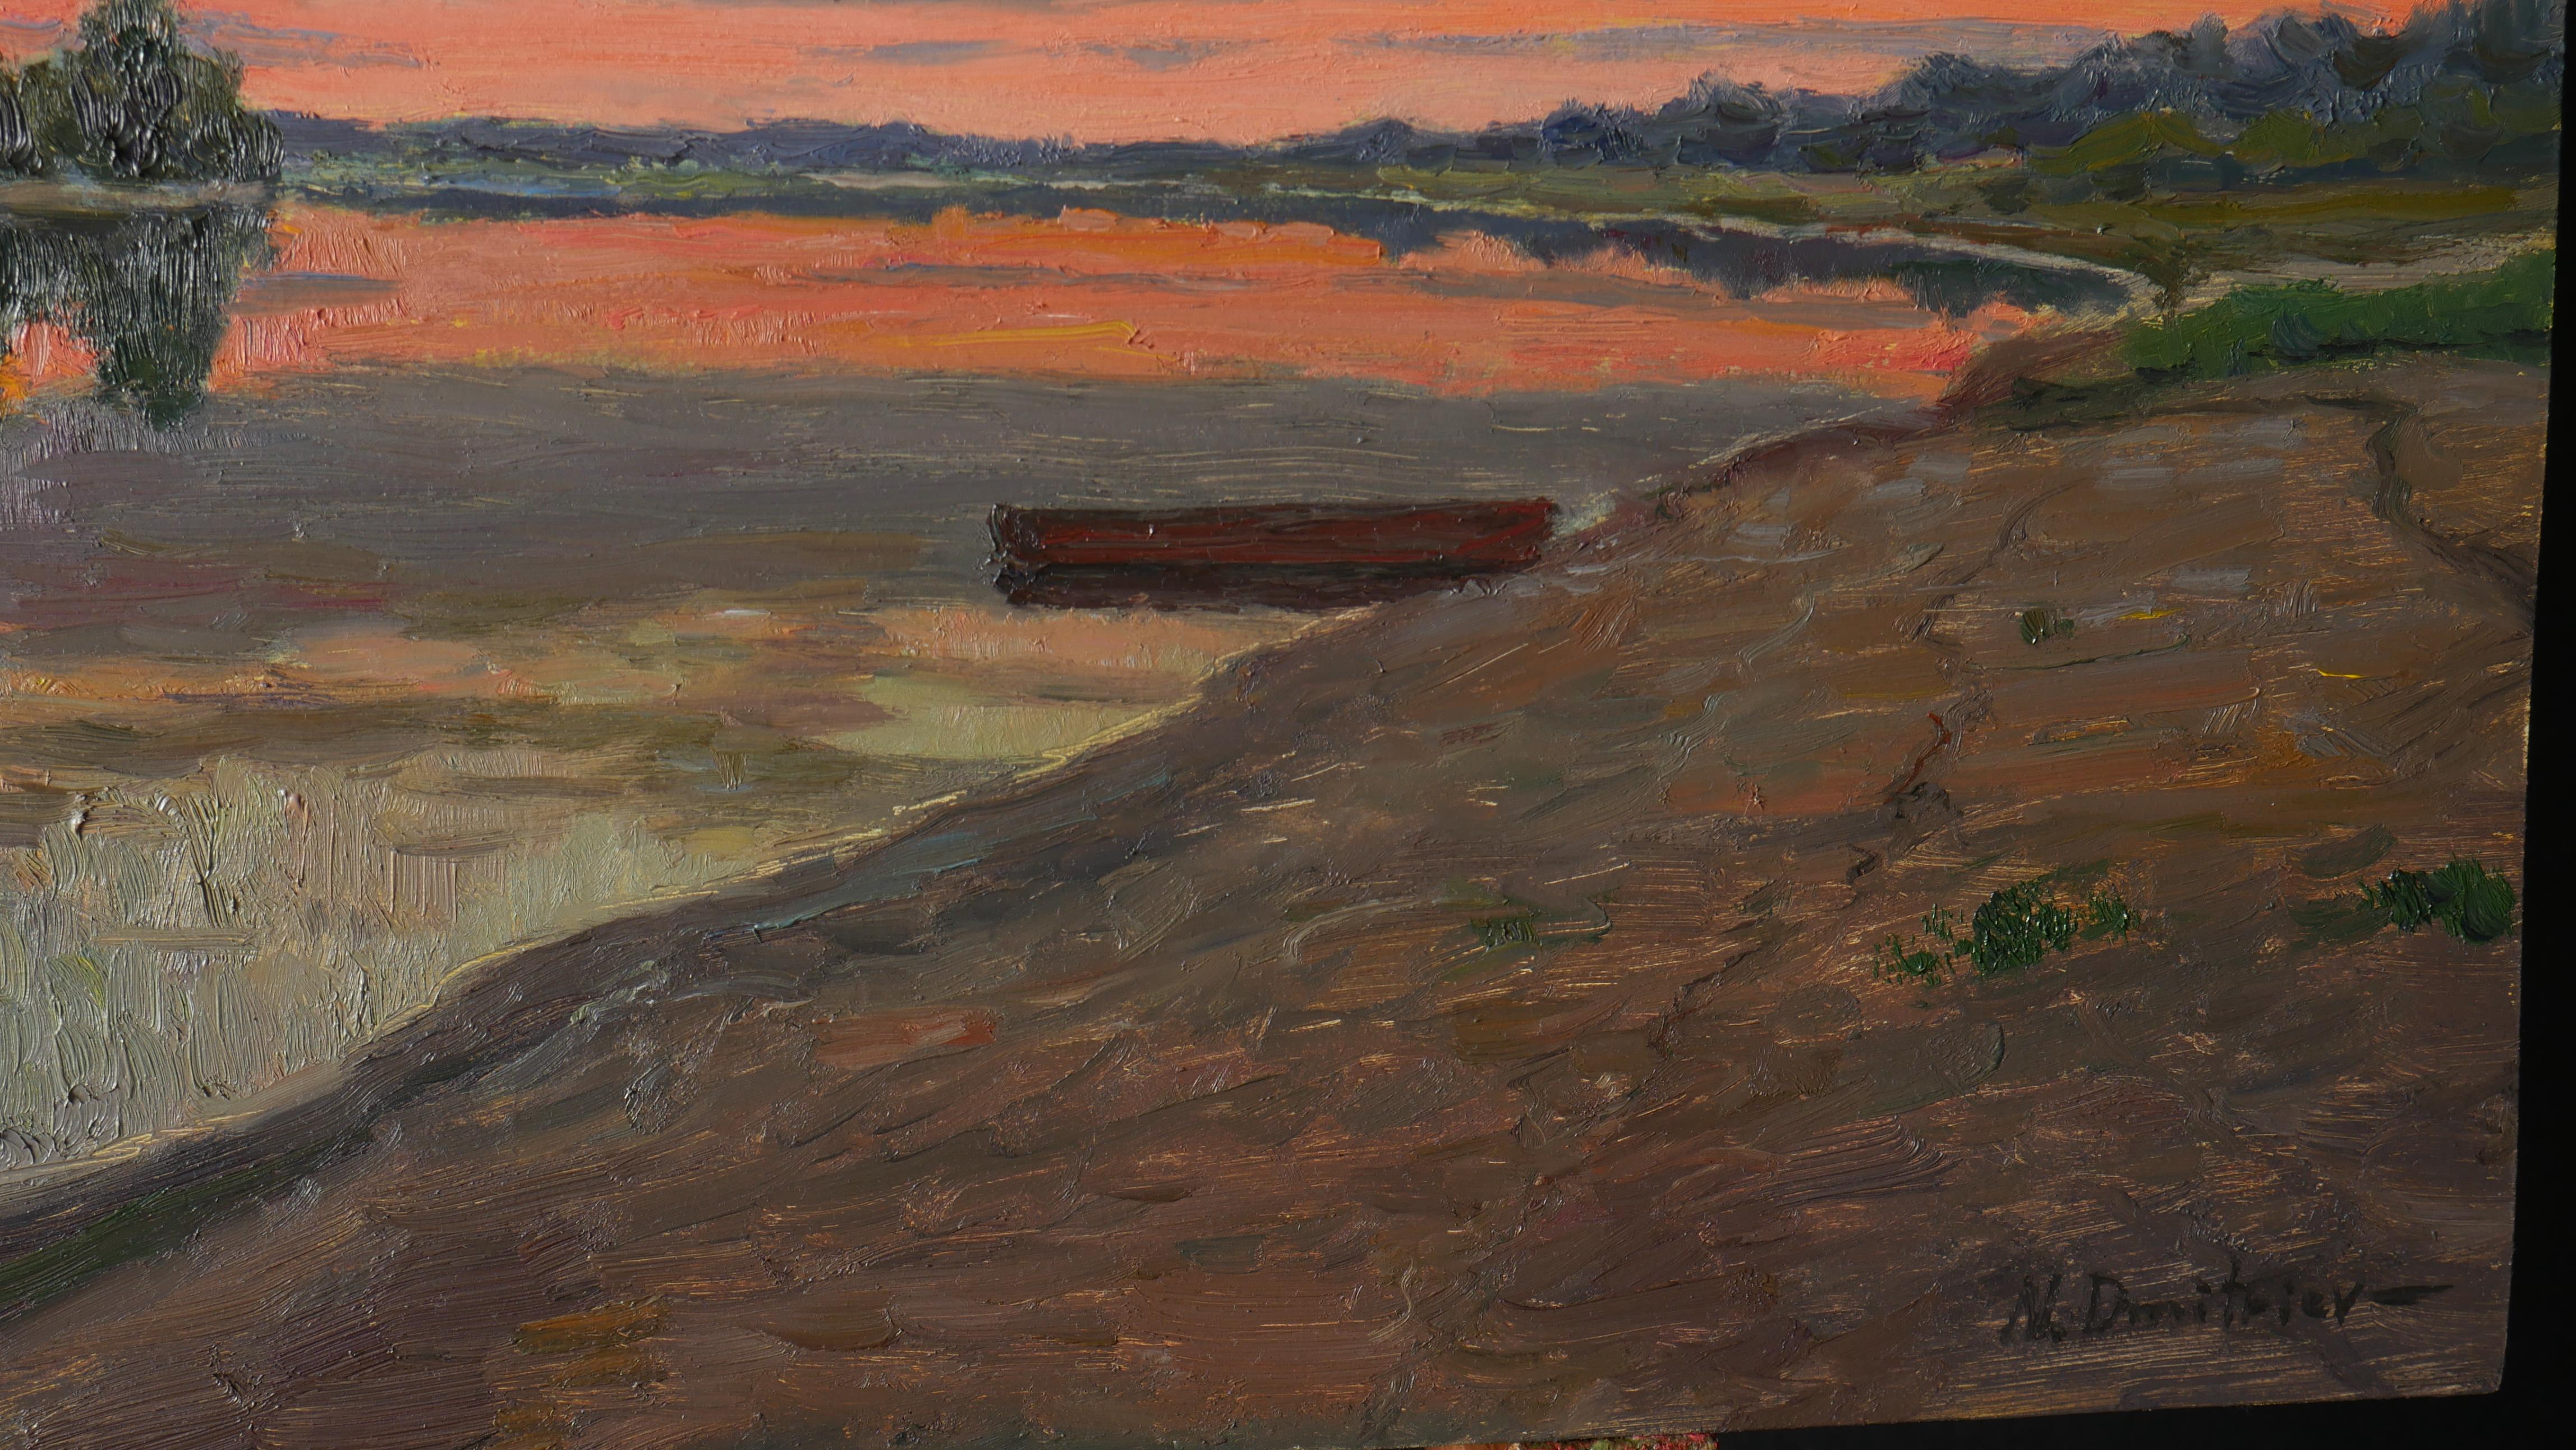 At The Silent Bank - sunset landscape painting For Sale 2